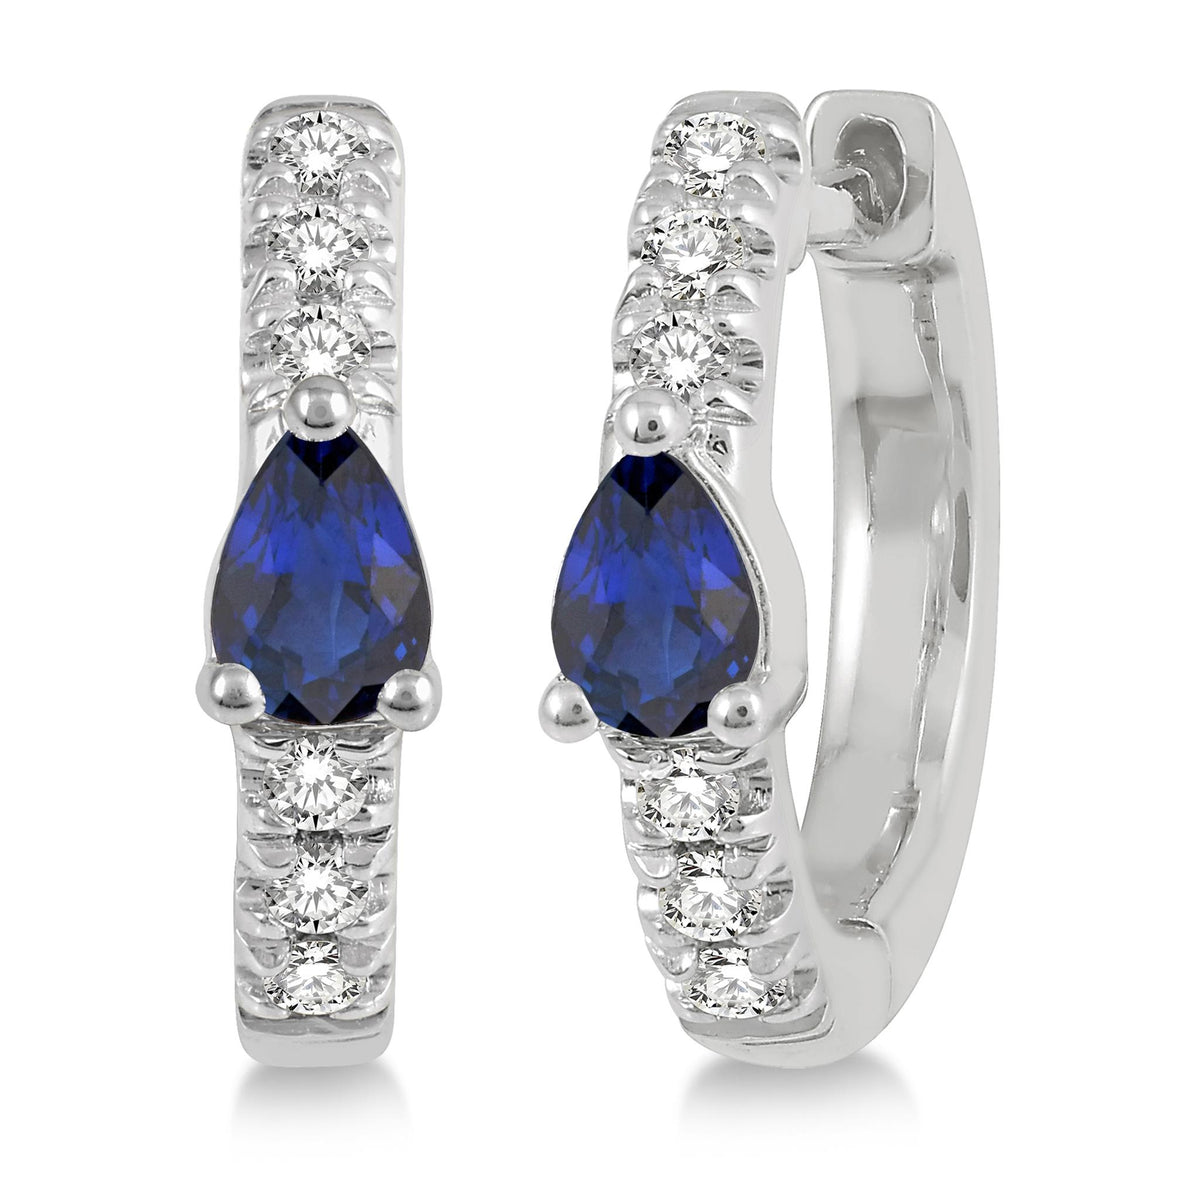 Lasker Petites-10Kt White Gold Round Hoop Earrings  With 0.10cttw Natural Diamonds and Sapphires